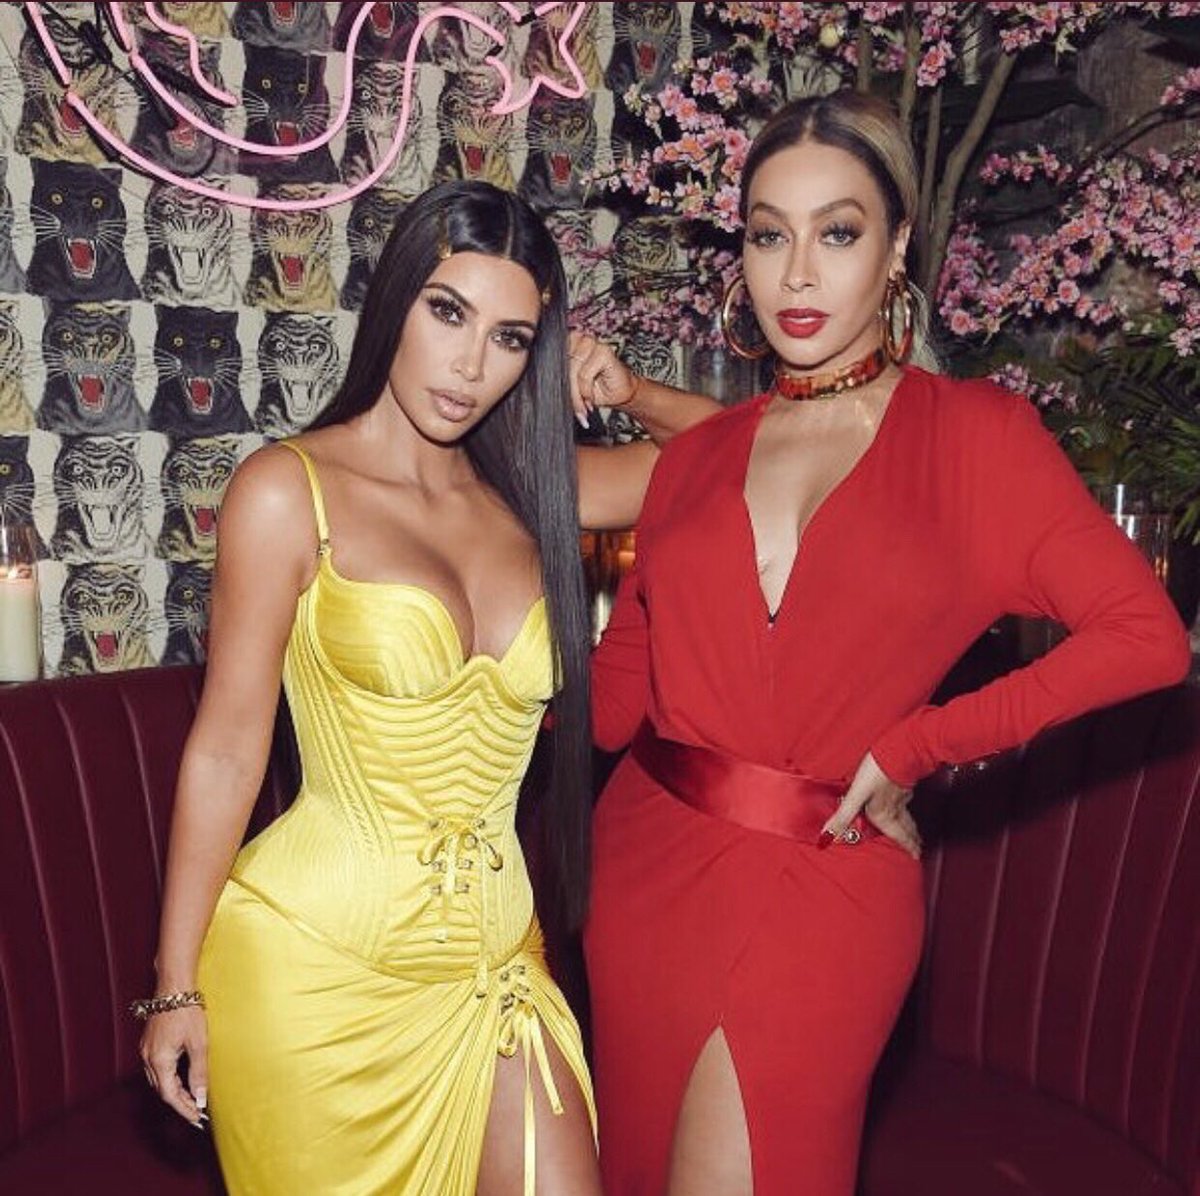 We go together like ketchup and mustard ????????✨???? @lala https://t.co/2VrfkOjiMA